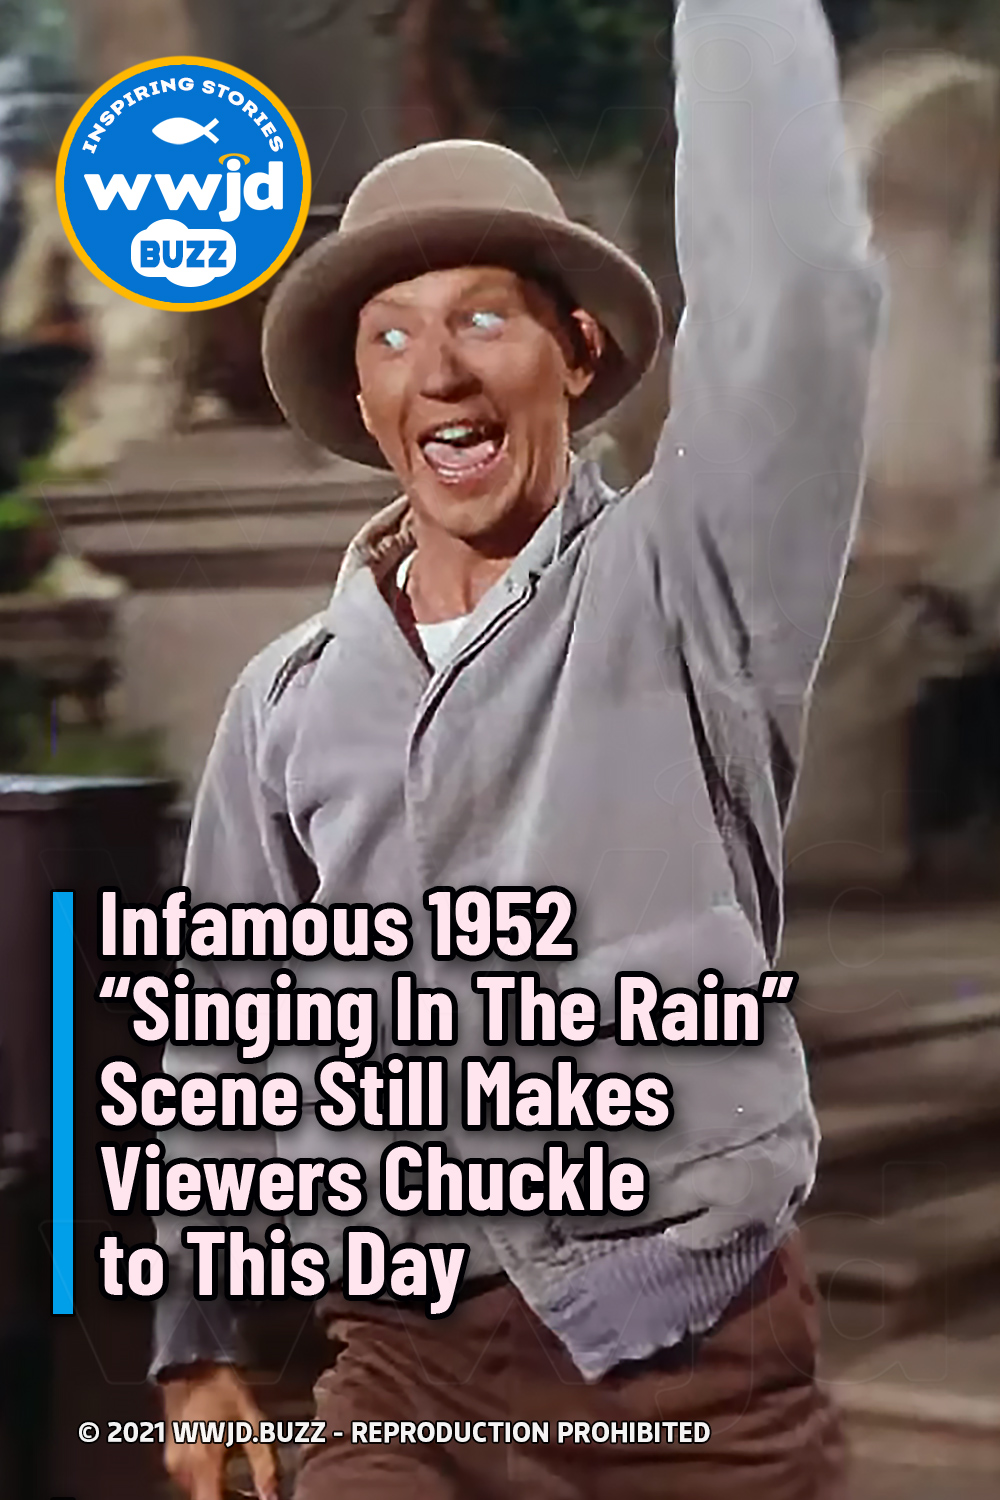 Infamous 1952 “Singing In The Rain” Scene Still Makes Viewers Chuckle to This Day